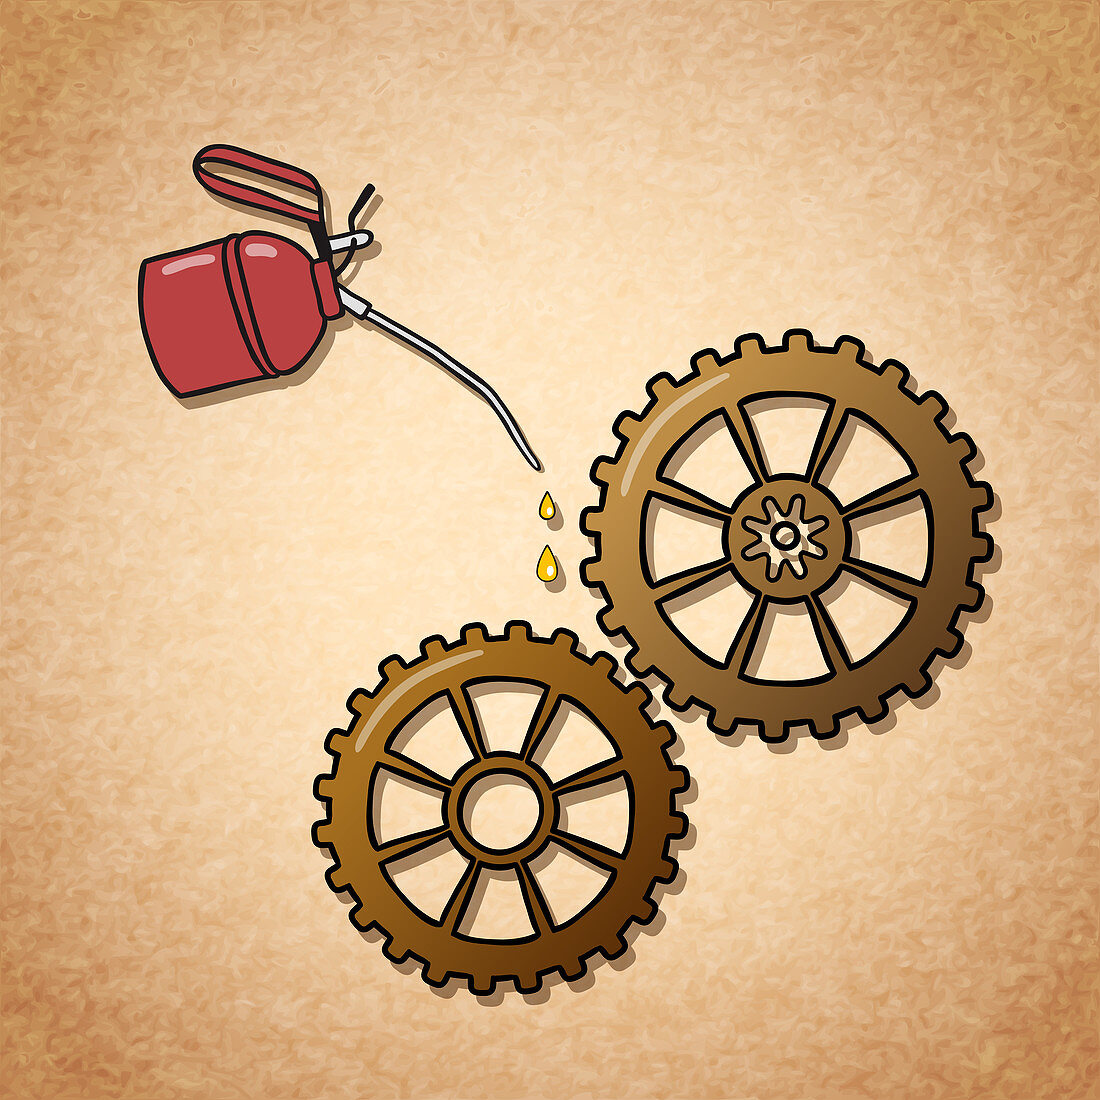 Oiling cogs, illustration